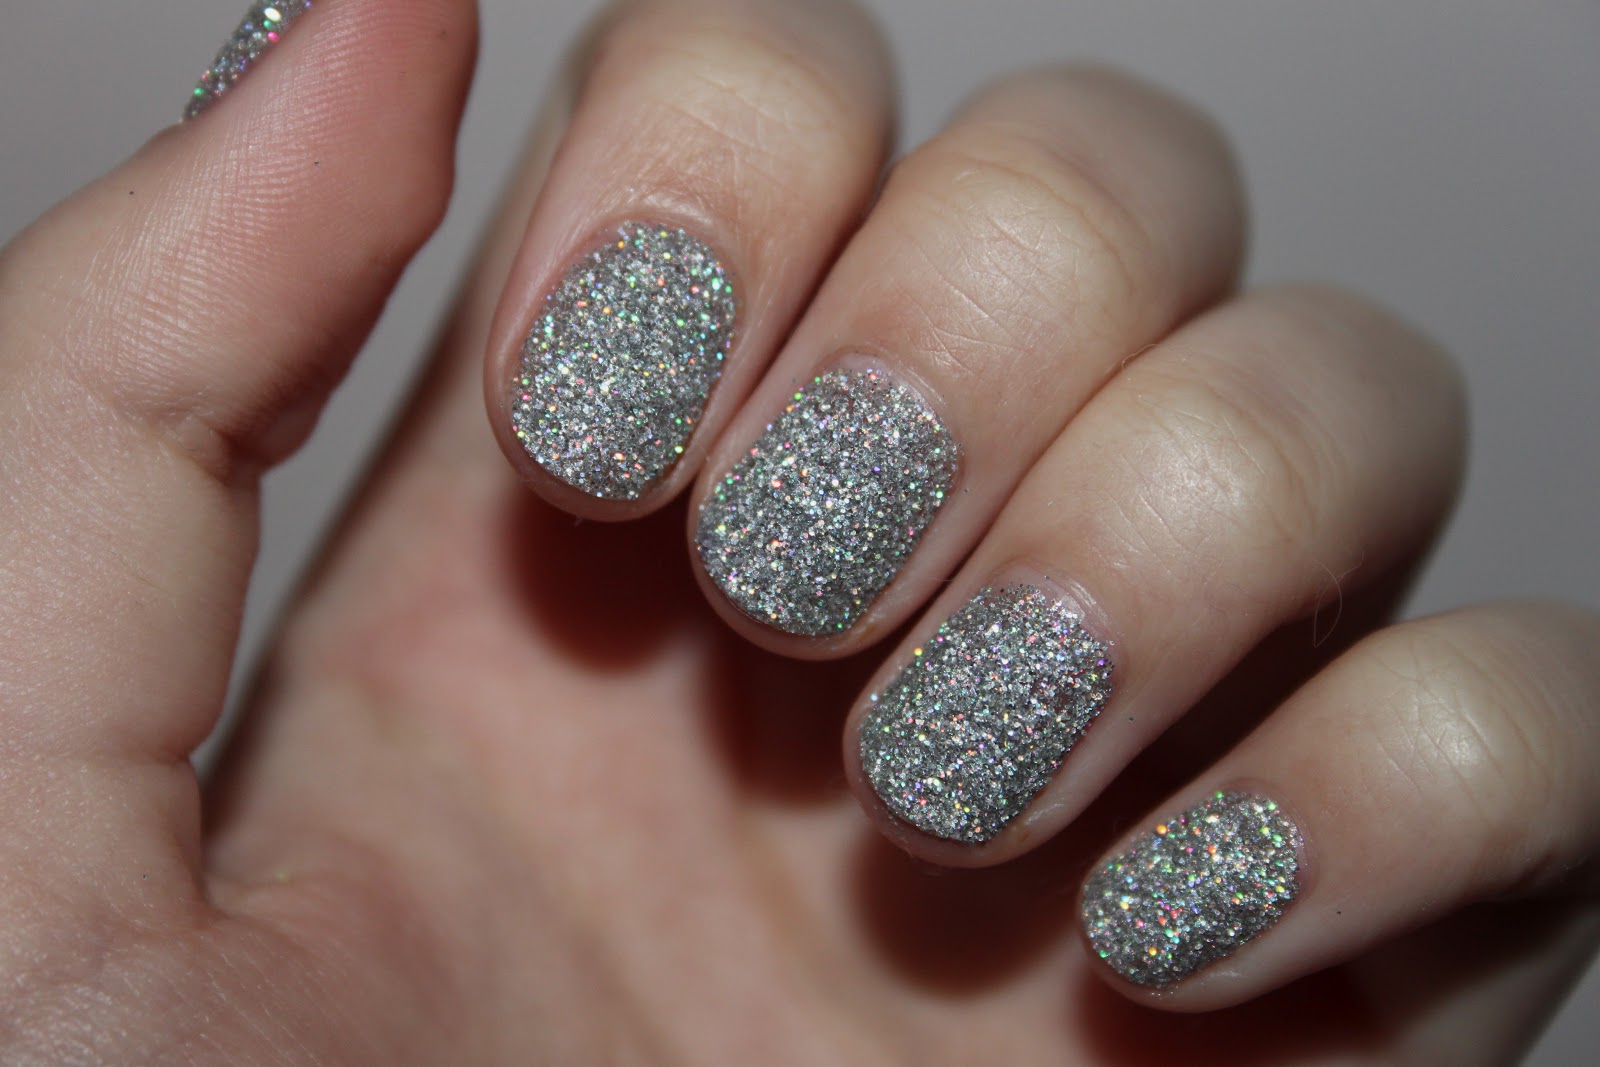 the beauty series | uk beauty blog: holographic glitter nails